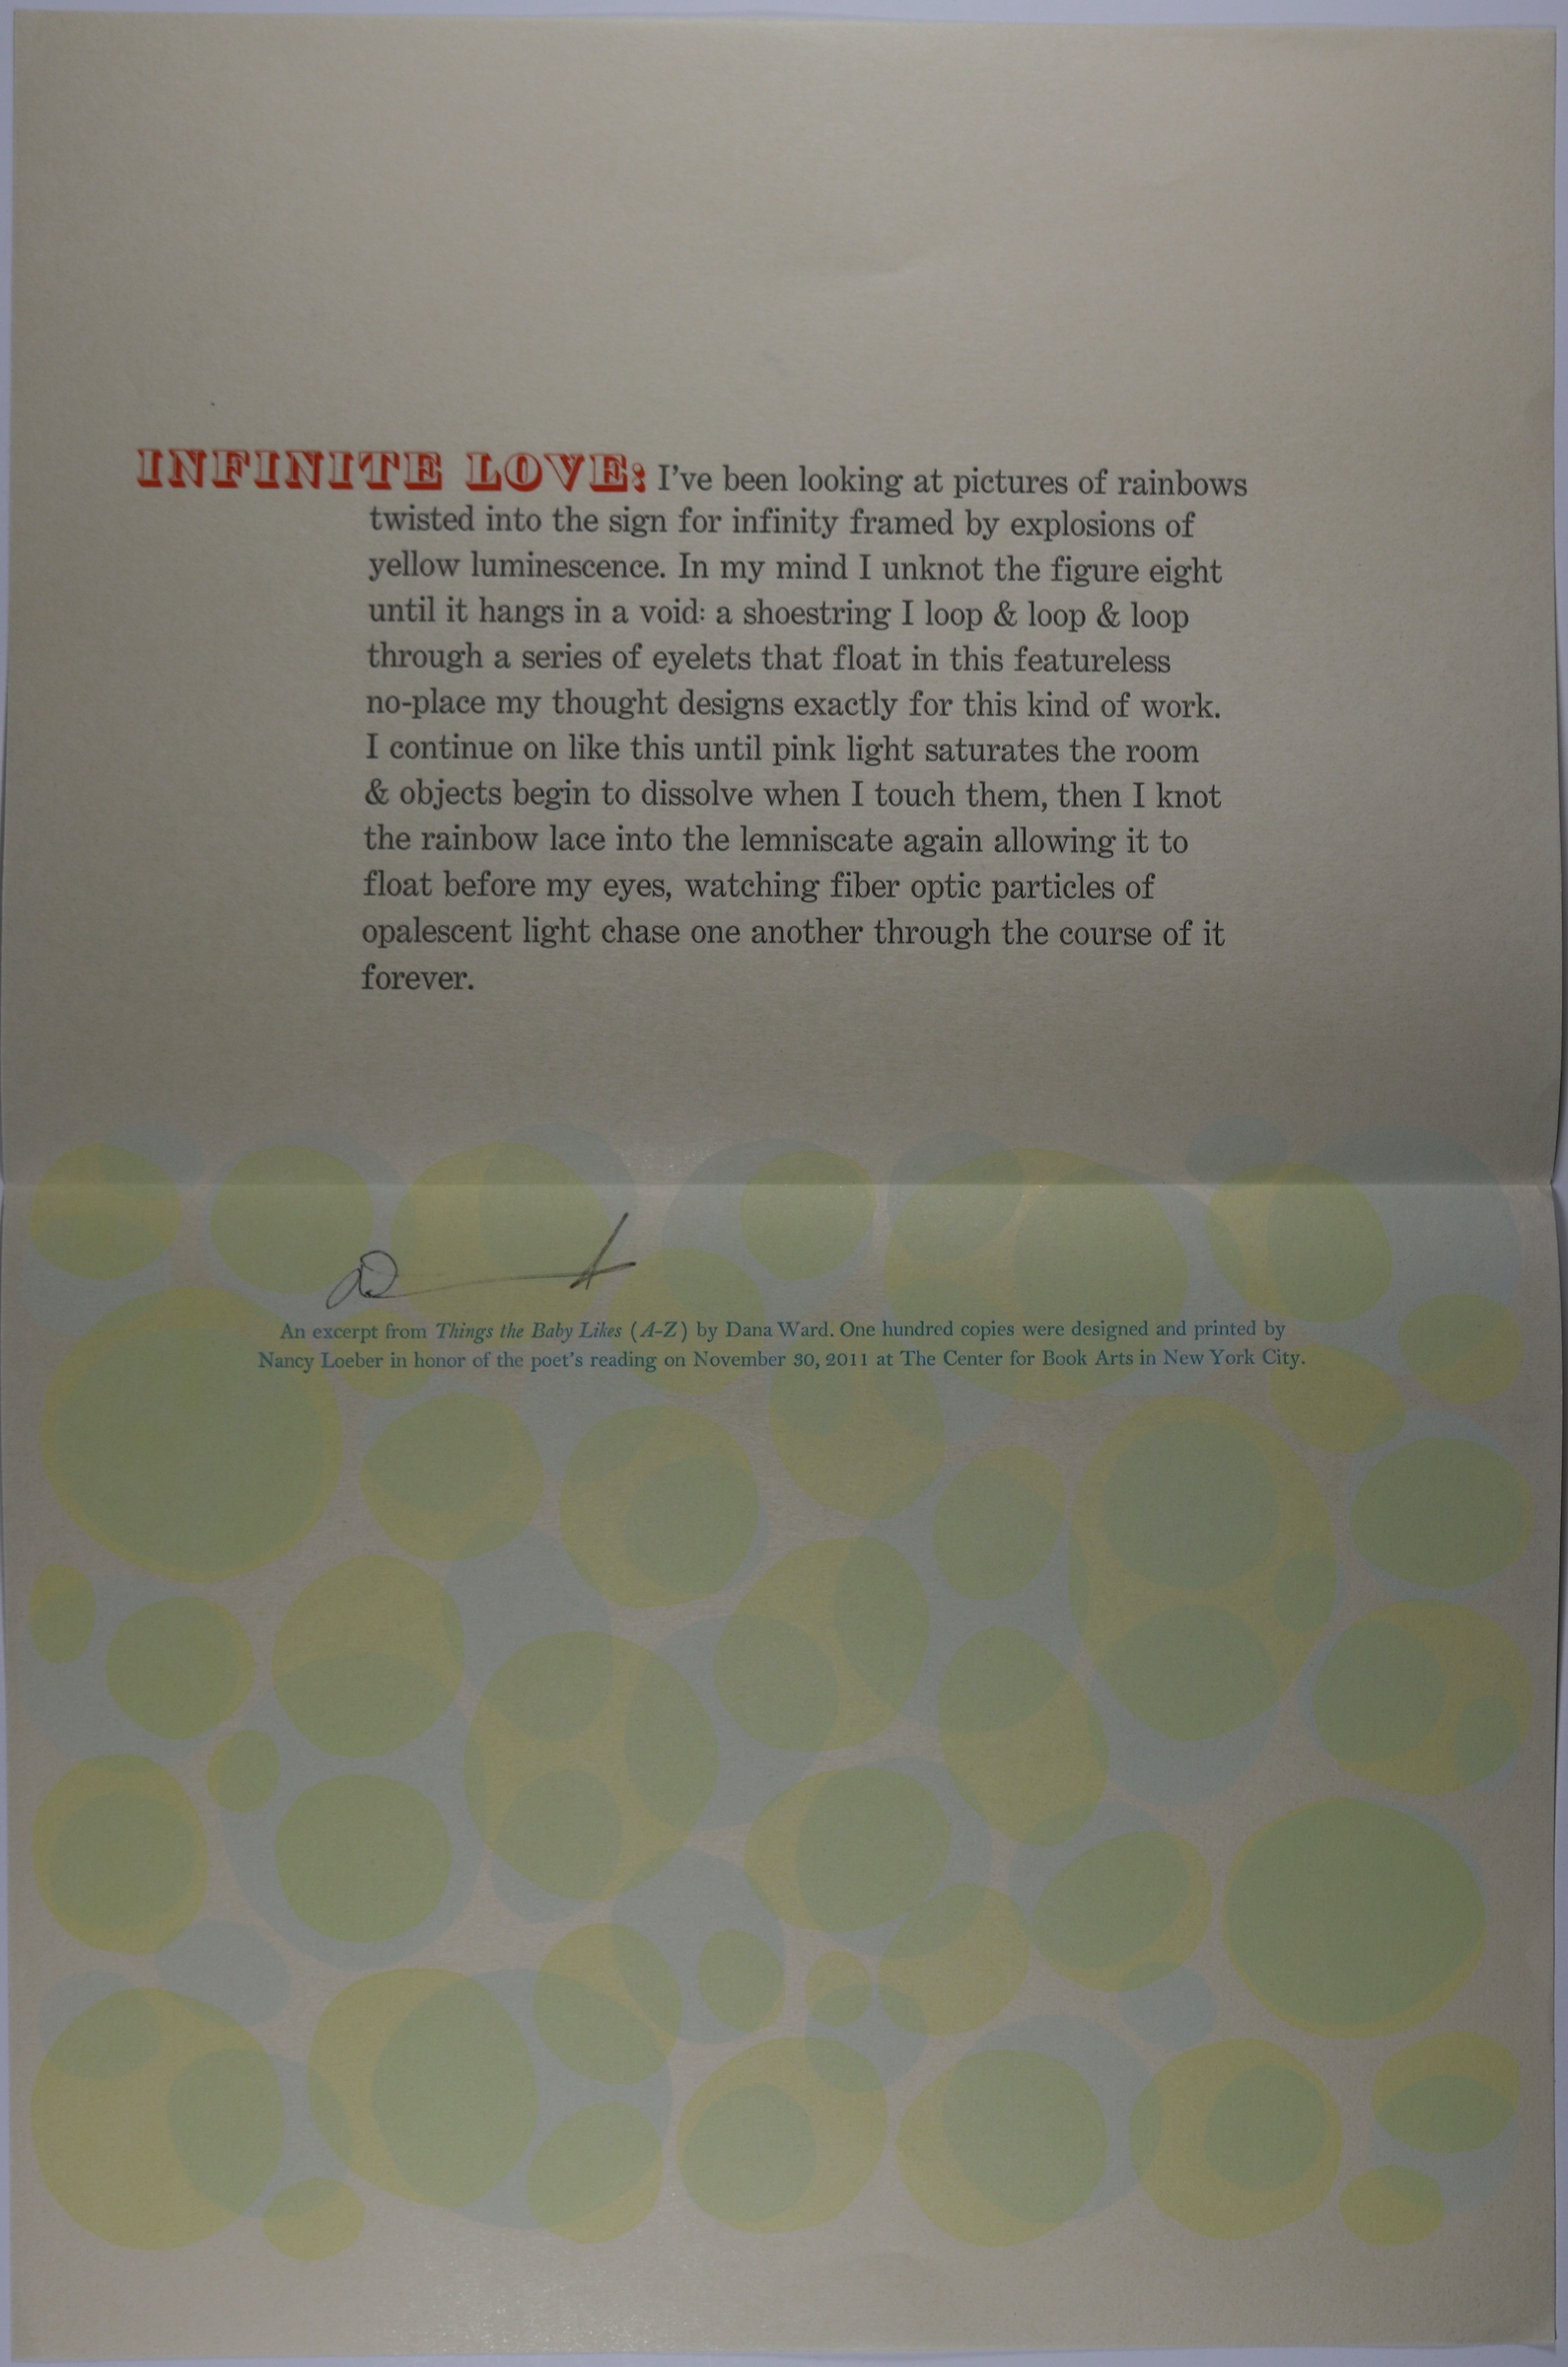 Parchment colored paper with the title in large red letters, text centered in paragraph form. Below is a print with light green and yellow circles.